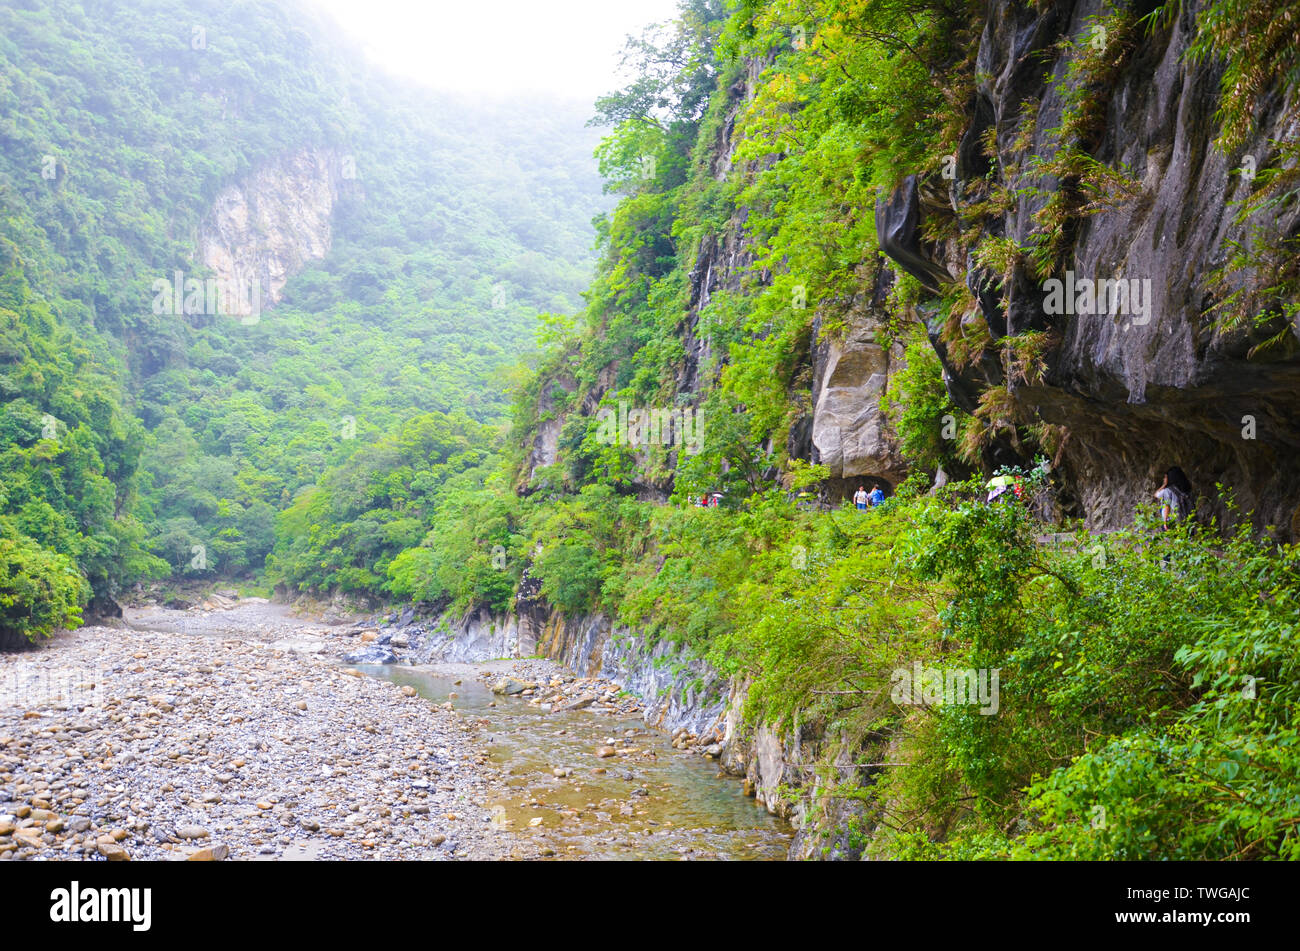 Magnificent Taroko Gorge in Taroko National Park, Taiwan captured with tourists hiking on a rainy day with fog in background. Green tropical forest, mist. Nature, landscape. Stock Photo